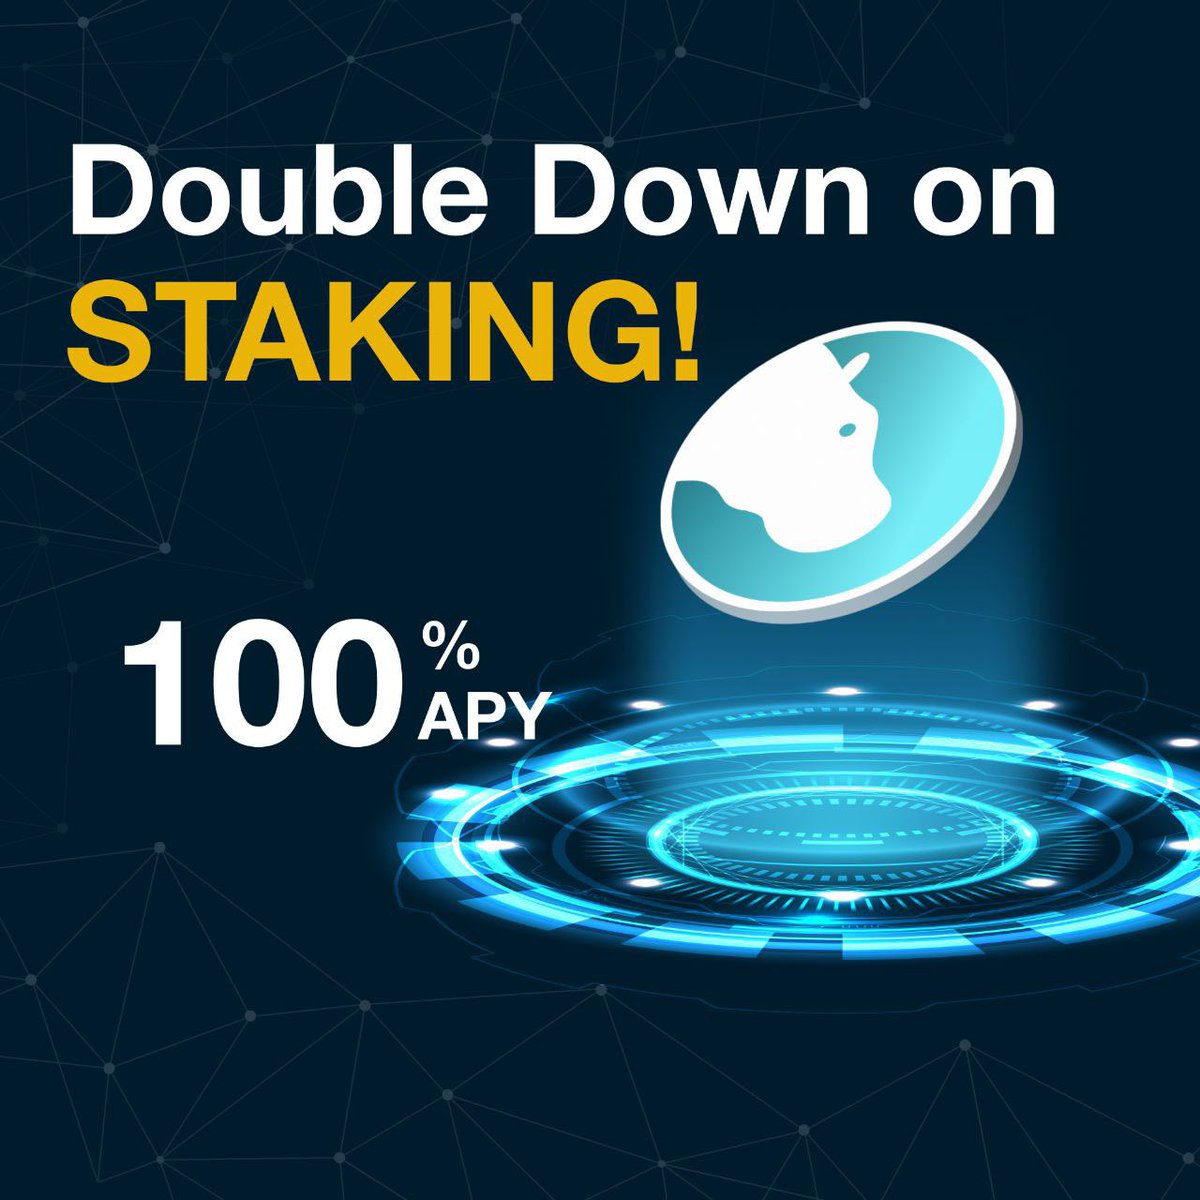 Unlock additional profits by staking your #HPO tokens!

You can stake effortlessly via the #HippoWallet app and HPO #staking platform 💎
Join the HPO staking community today to boost your earnings. 
Start earning up to 6% monthly or 100% annually now💰
#Cryptocurrency #Altcoin